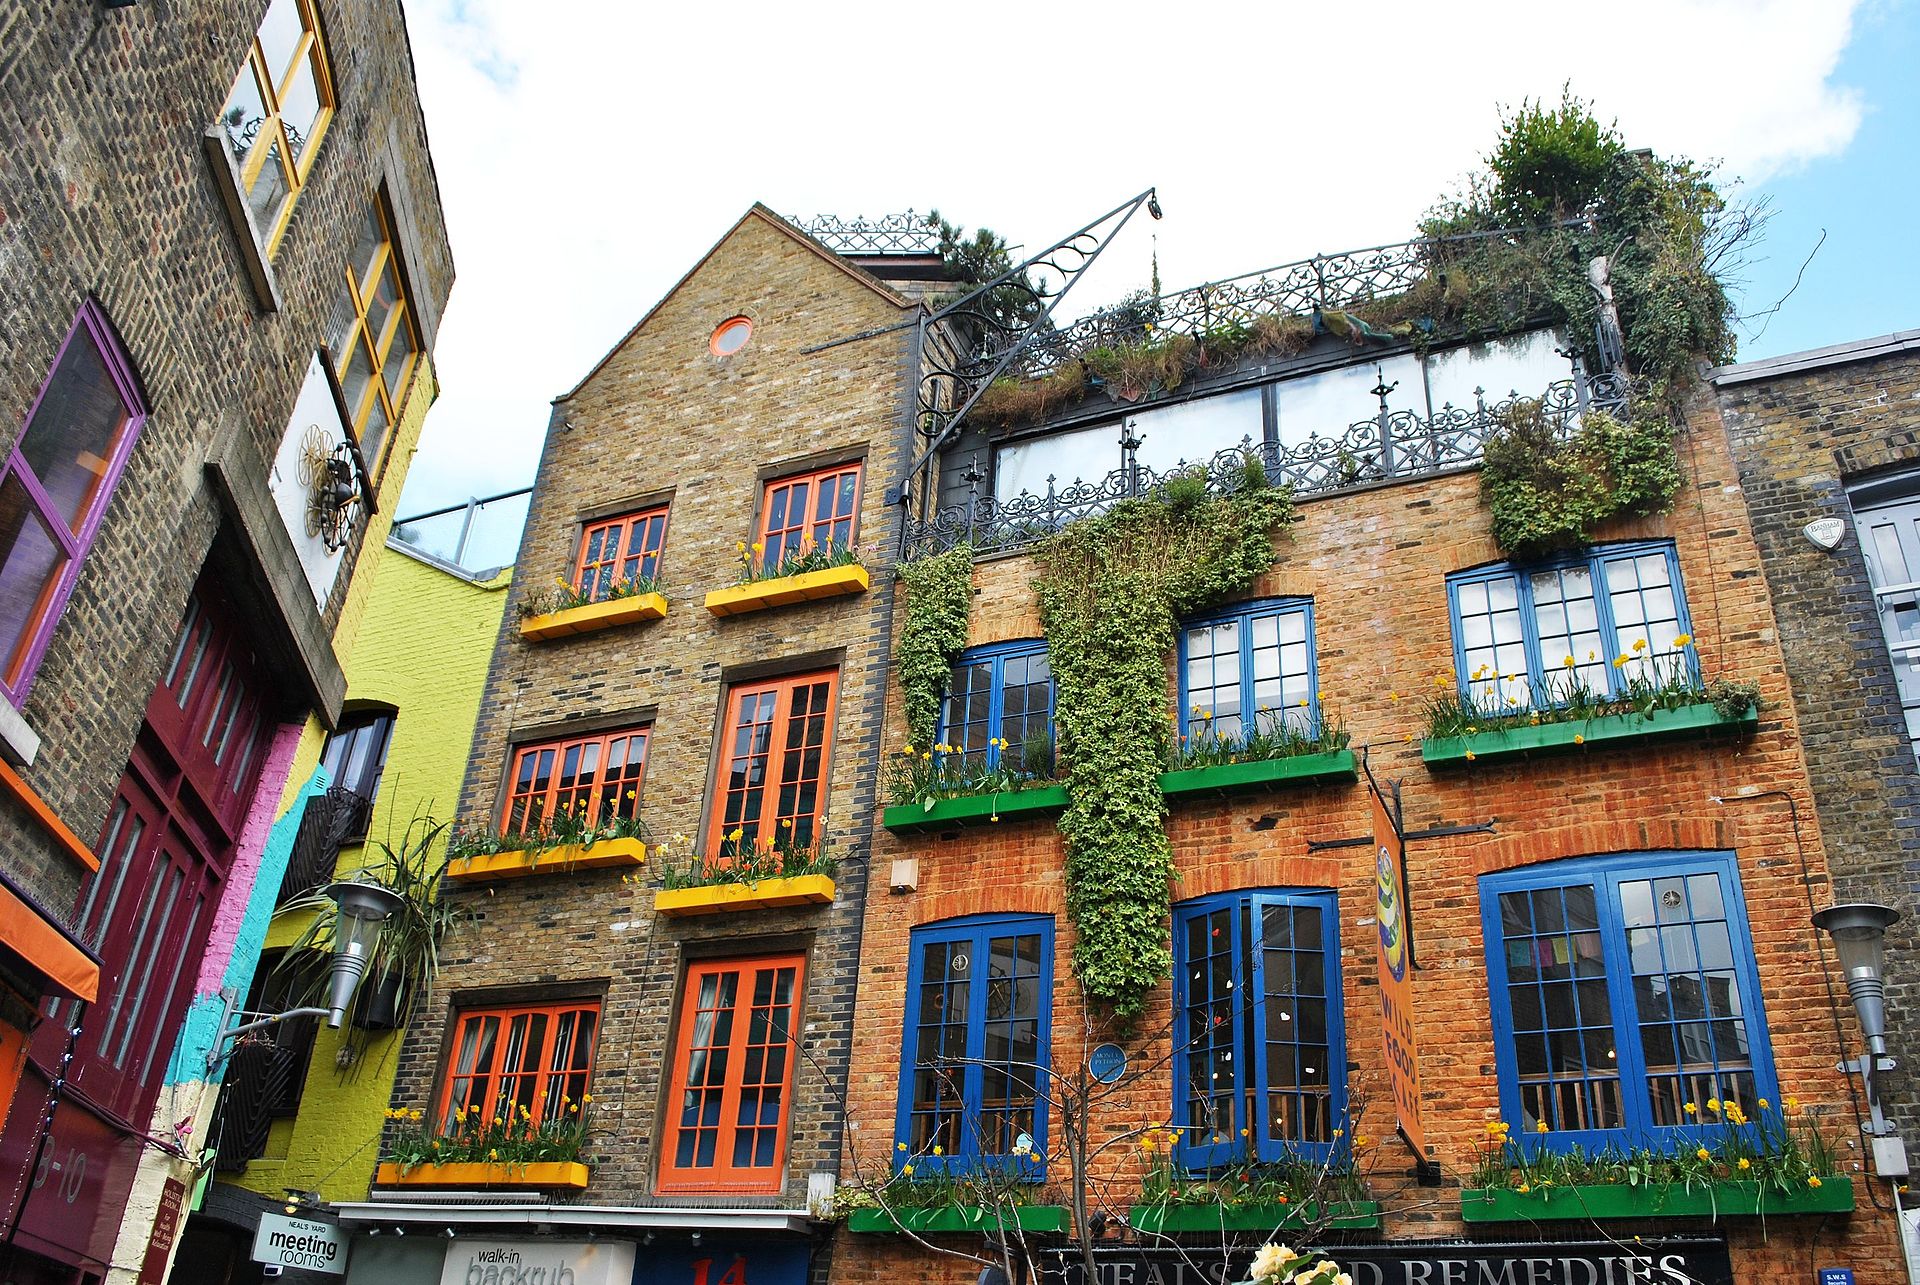 visit Neal's Yard - What to do in London